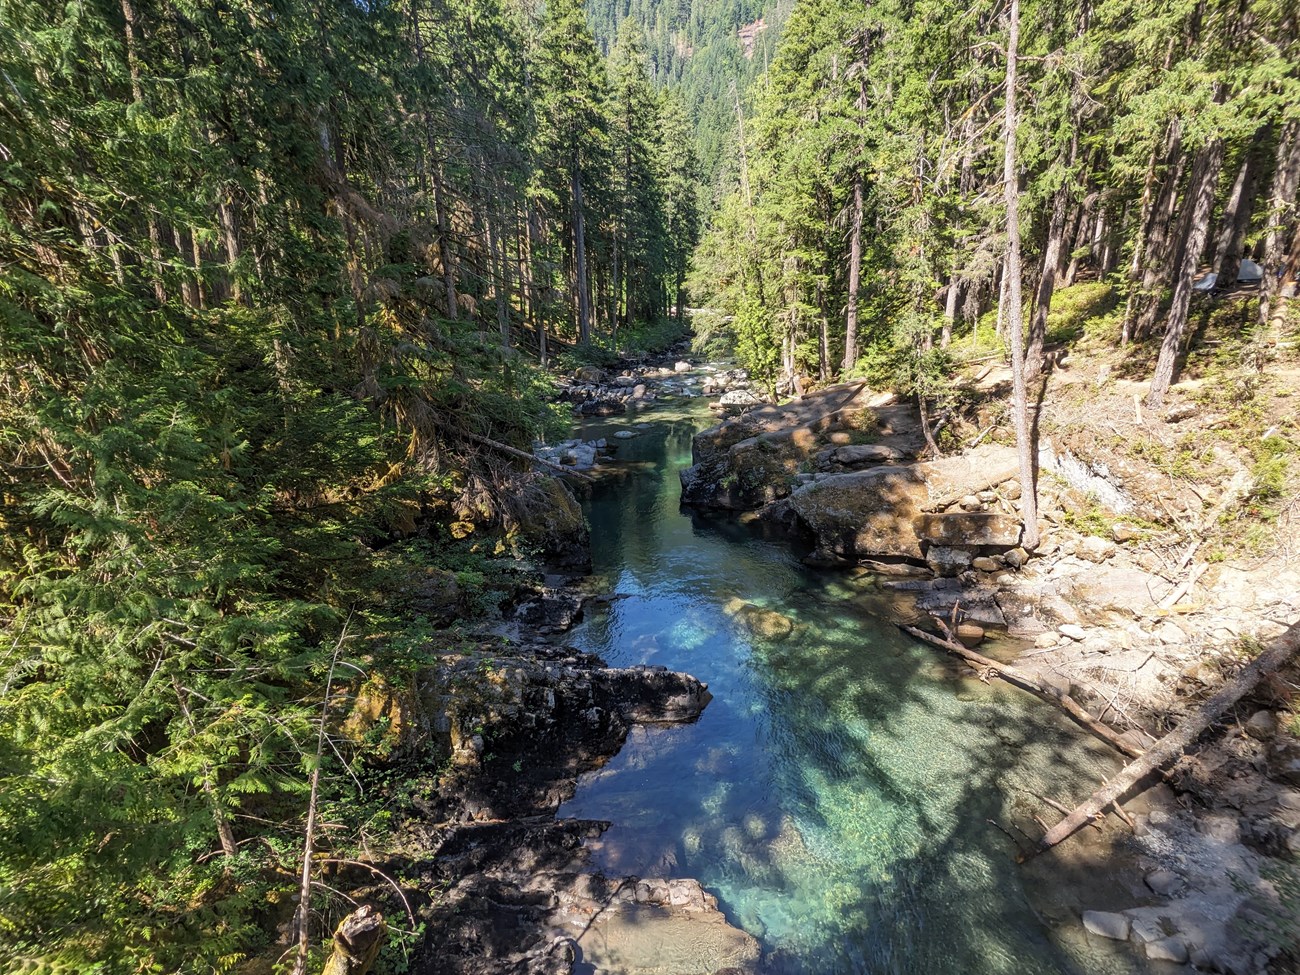 A shallow turquoise river flows through a rocky ravine, with steep banks covered with evergreen trees.